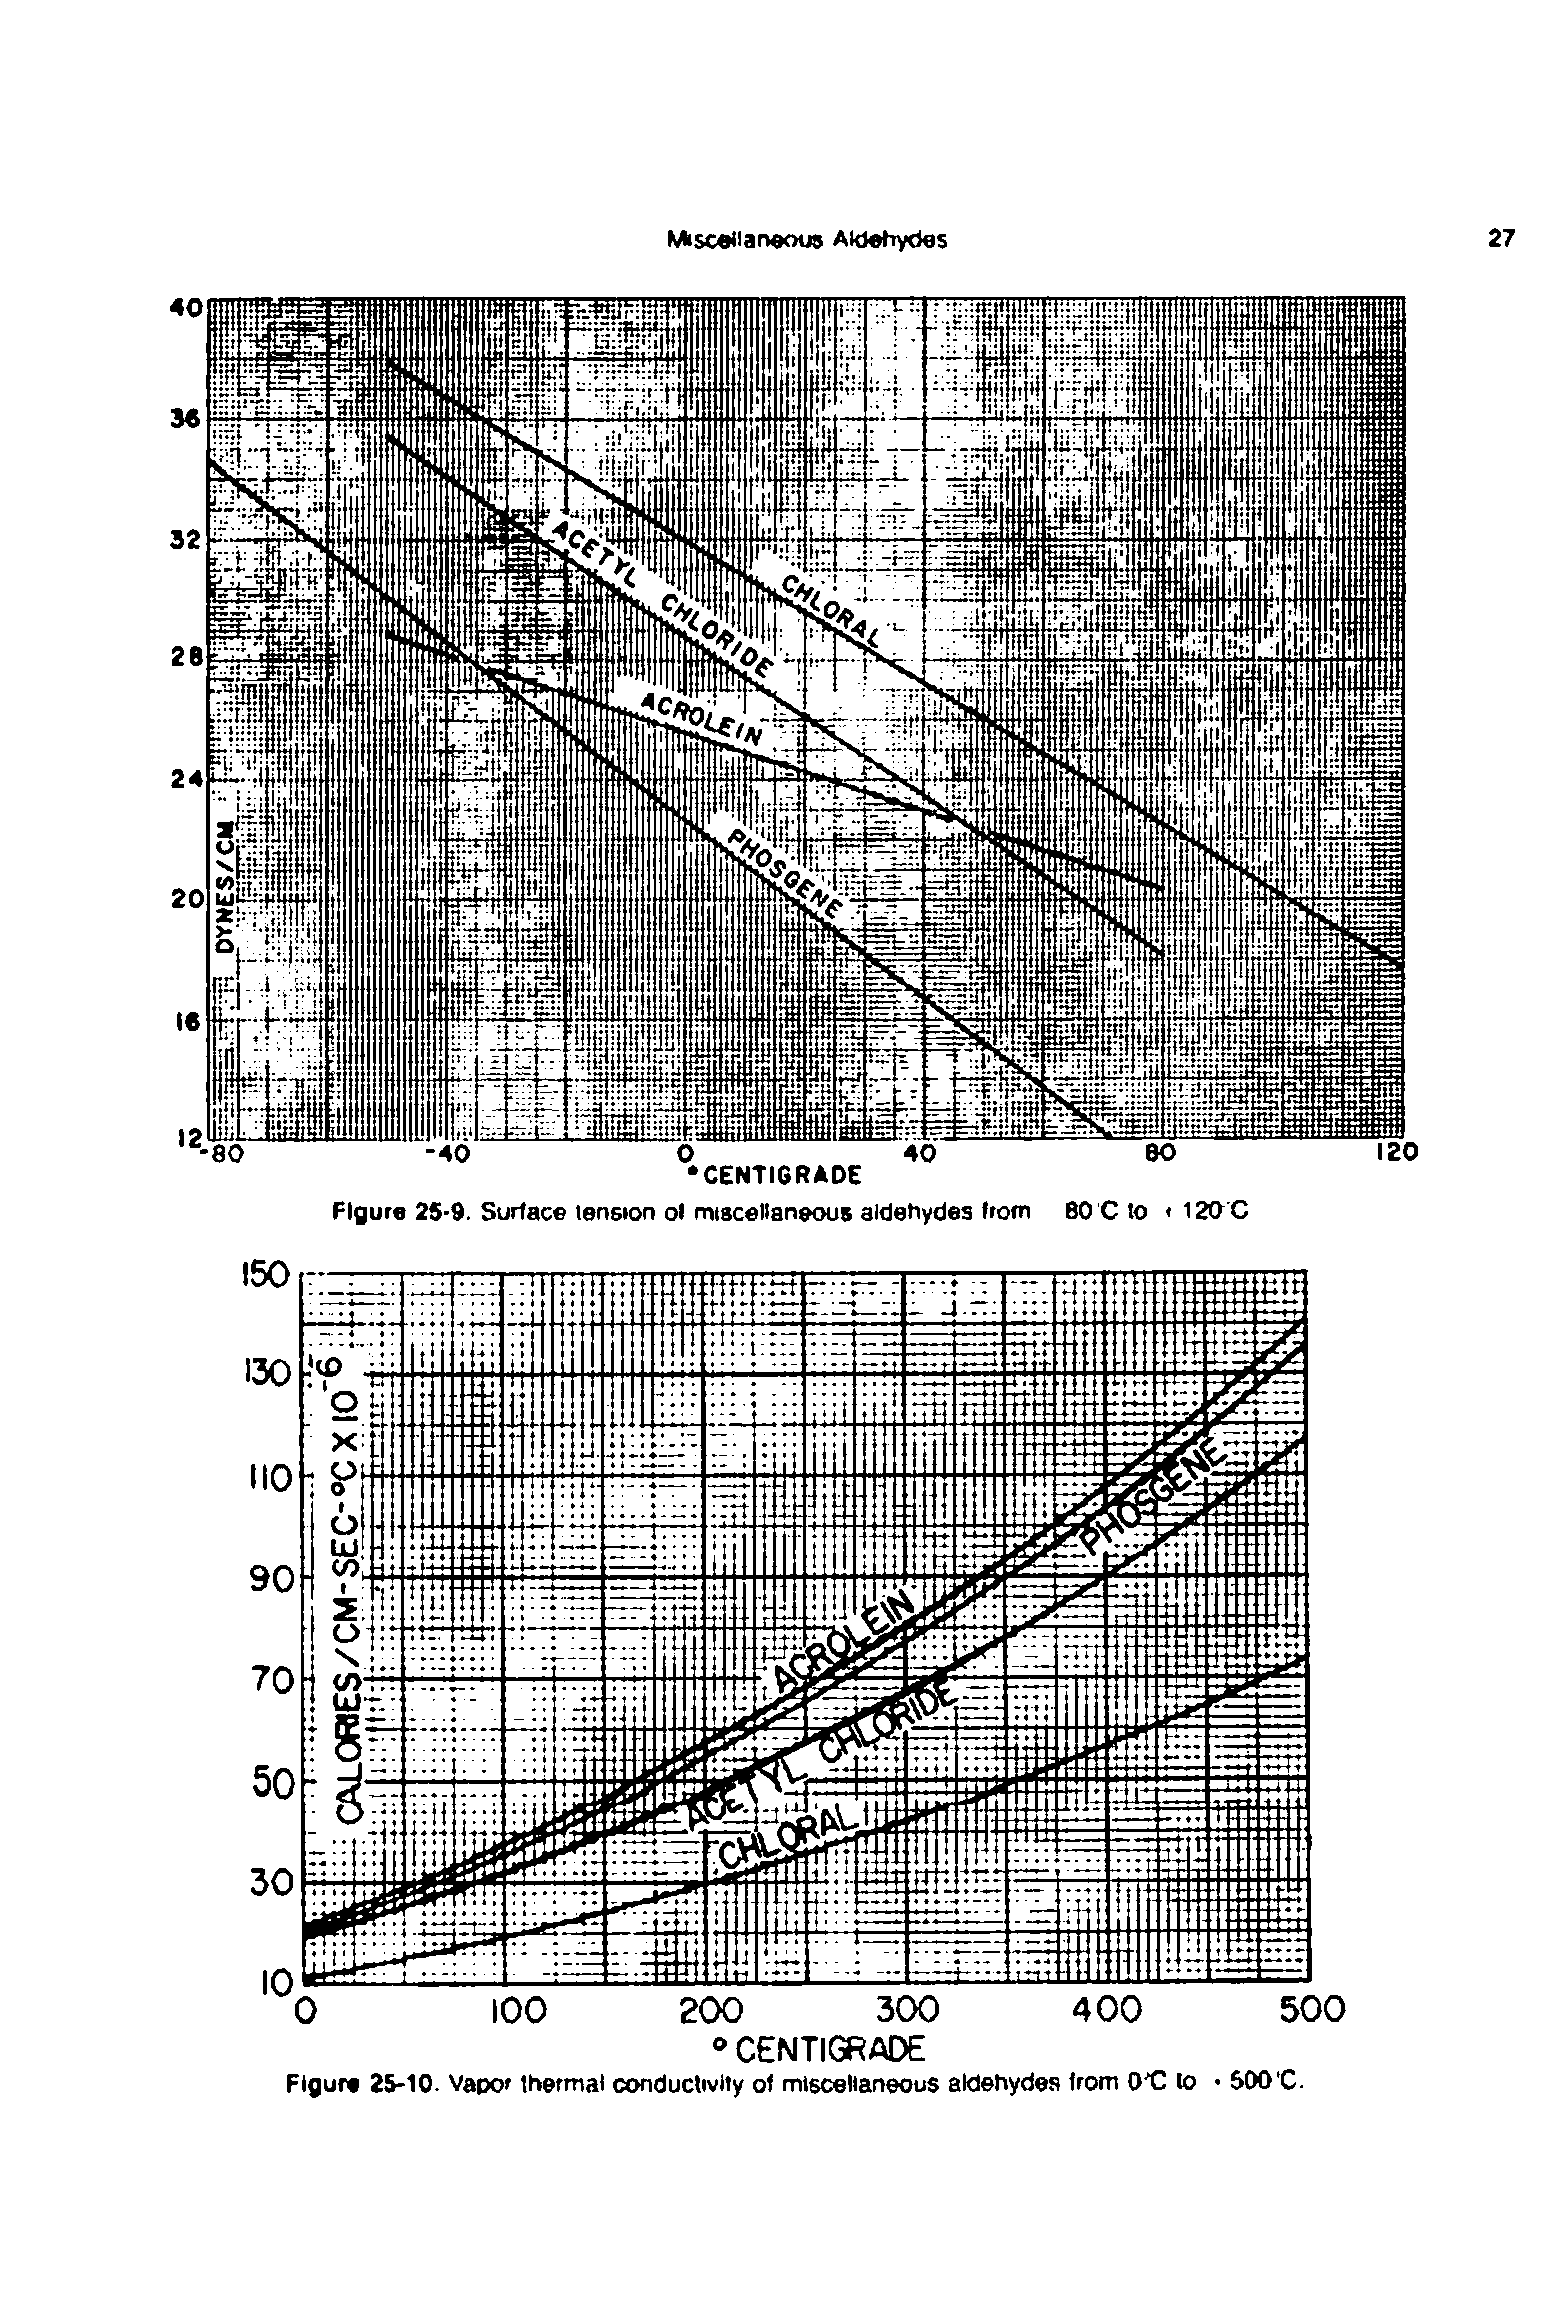 Figure 25-10 Vapor thermal conductivity of miscellaneous aldehydes from O C to 500 C.